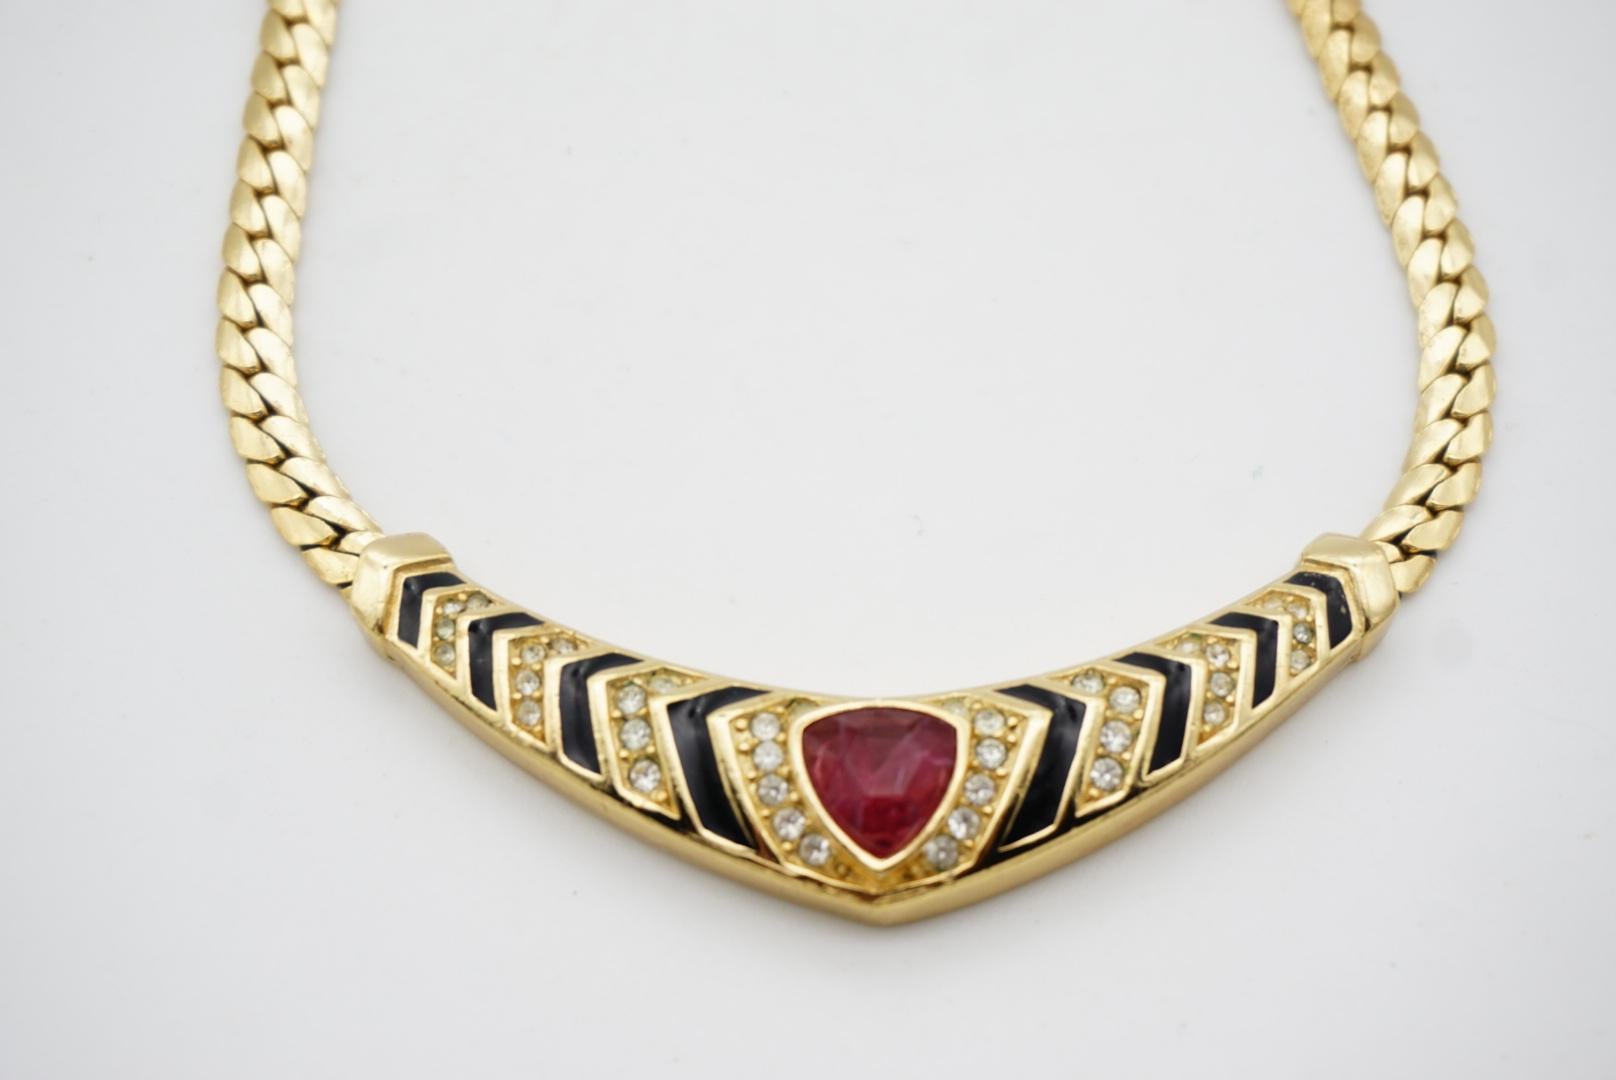 Christian Dior Vintage 1980s Ruby Black Crystals Triangle Pendant Gold Necklace For Sale 7